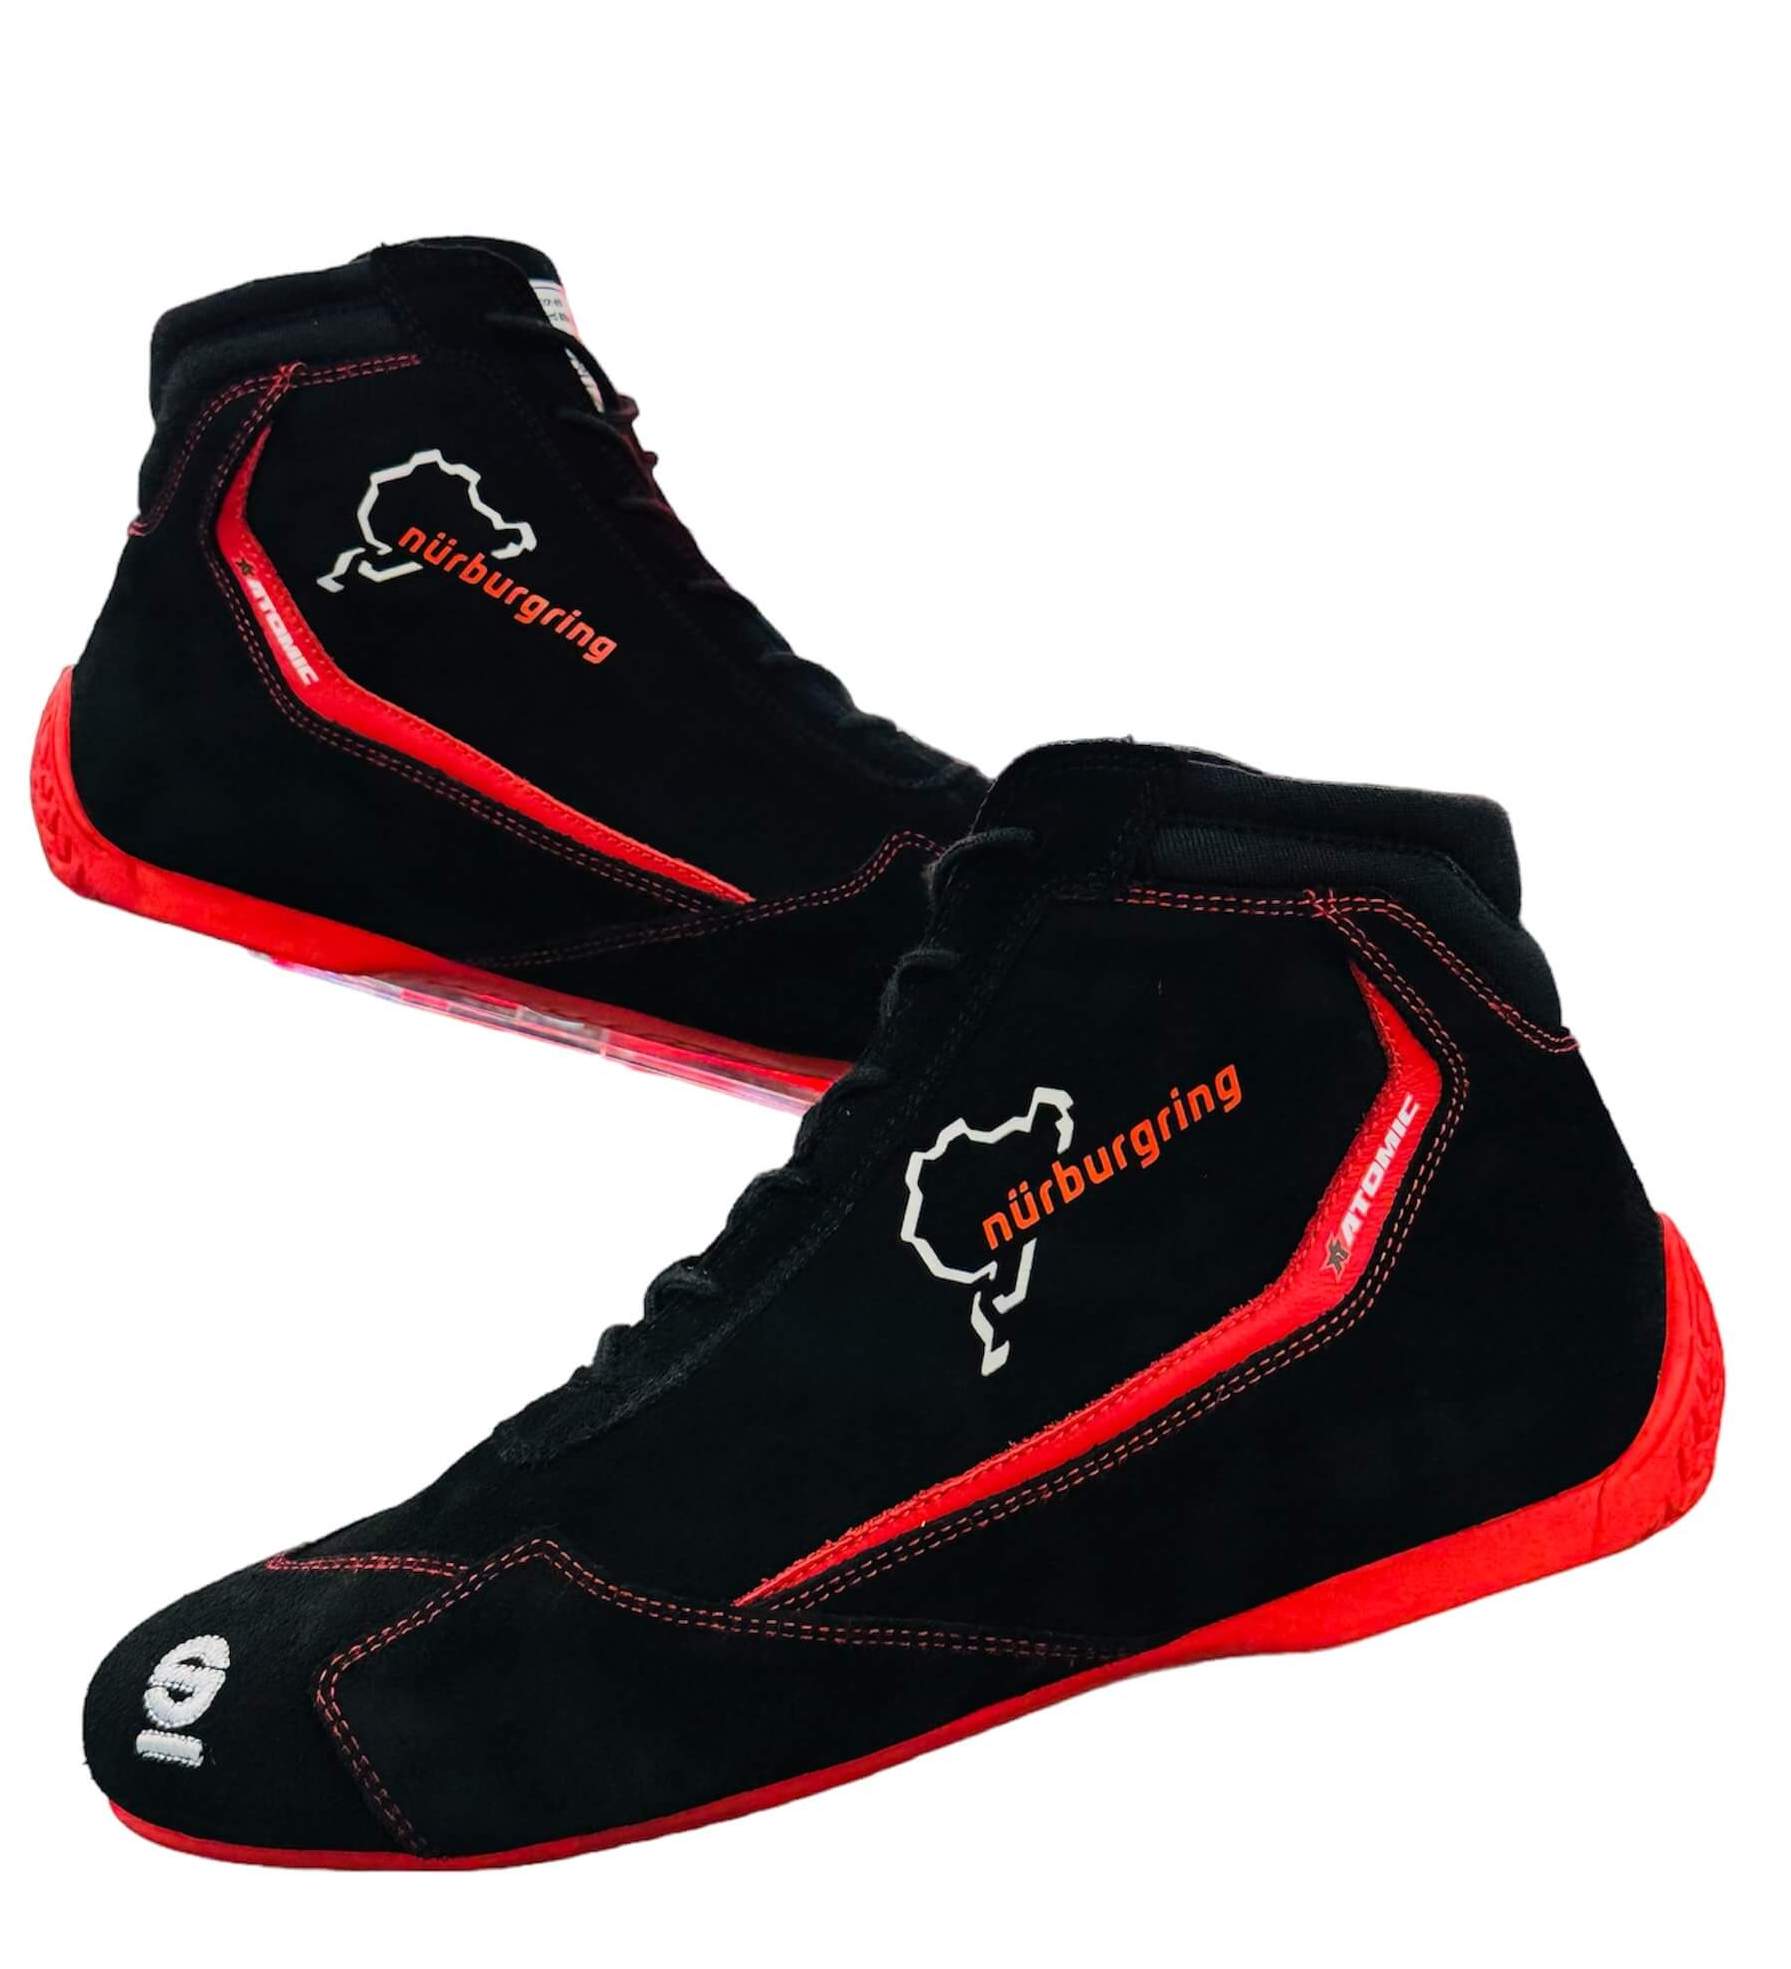 SPARCO 001295SP_NBR42 Shoes Slalom Nurburgring Edition black/red Size 42 Photo-3 